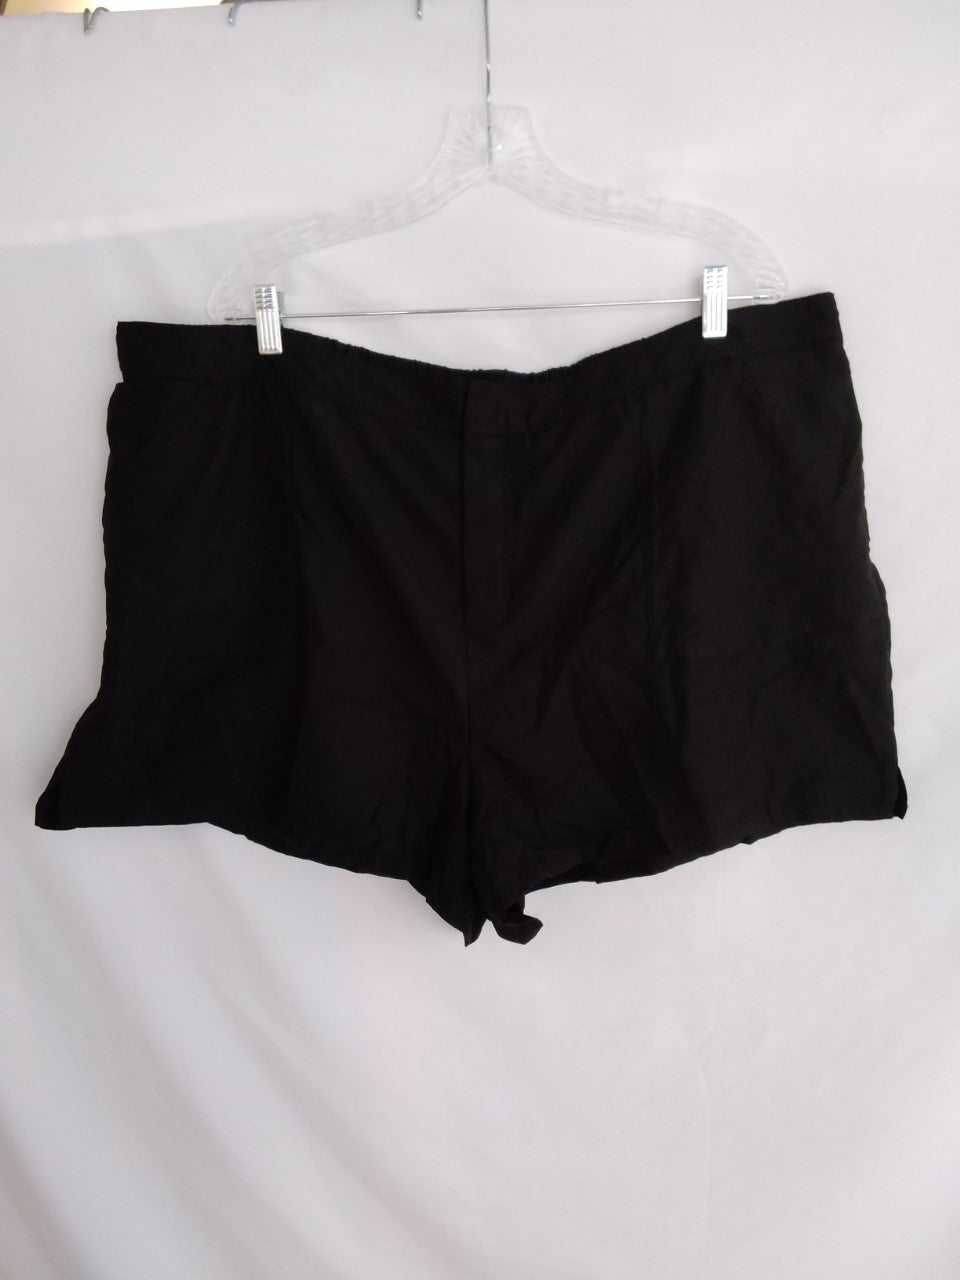 NWT - Swimsuits For All Black Loose Swim Shorts With Built-in Brief - 24